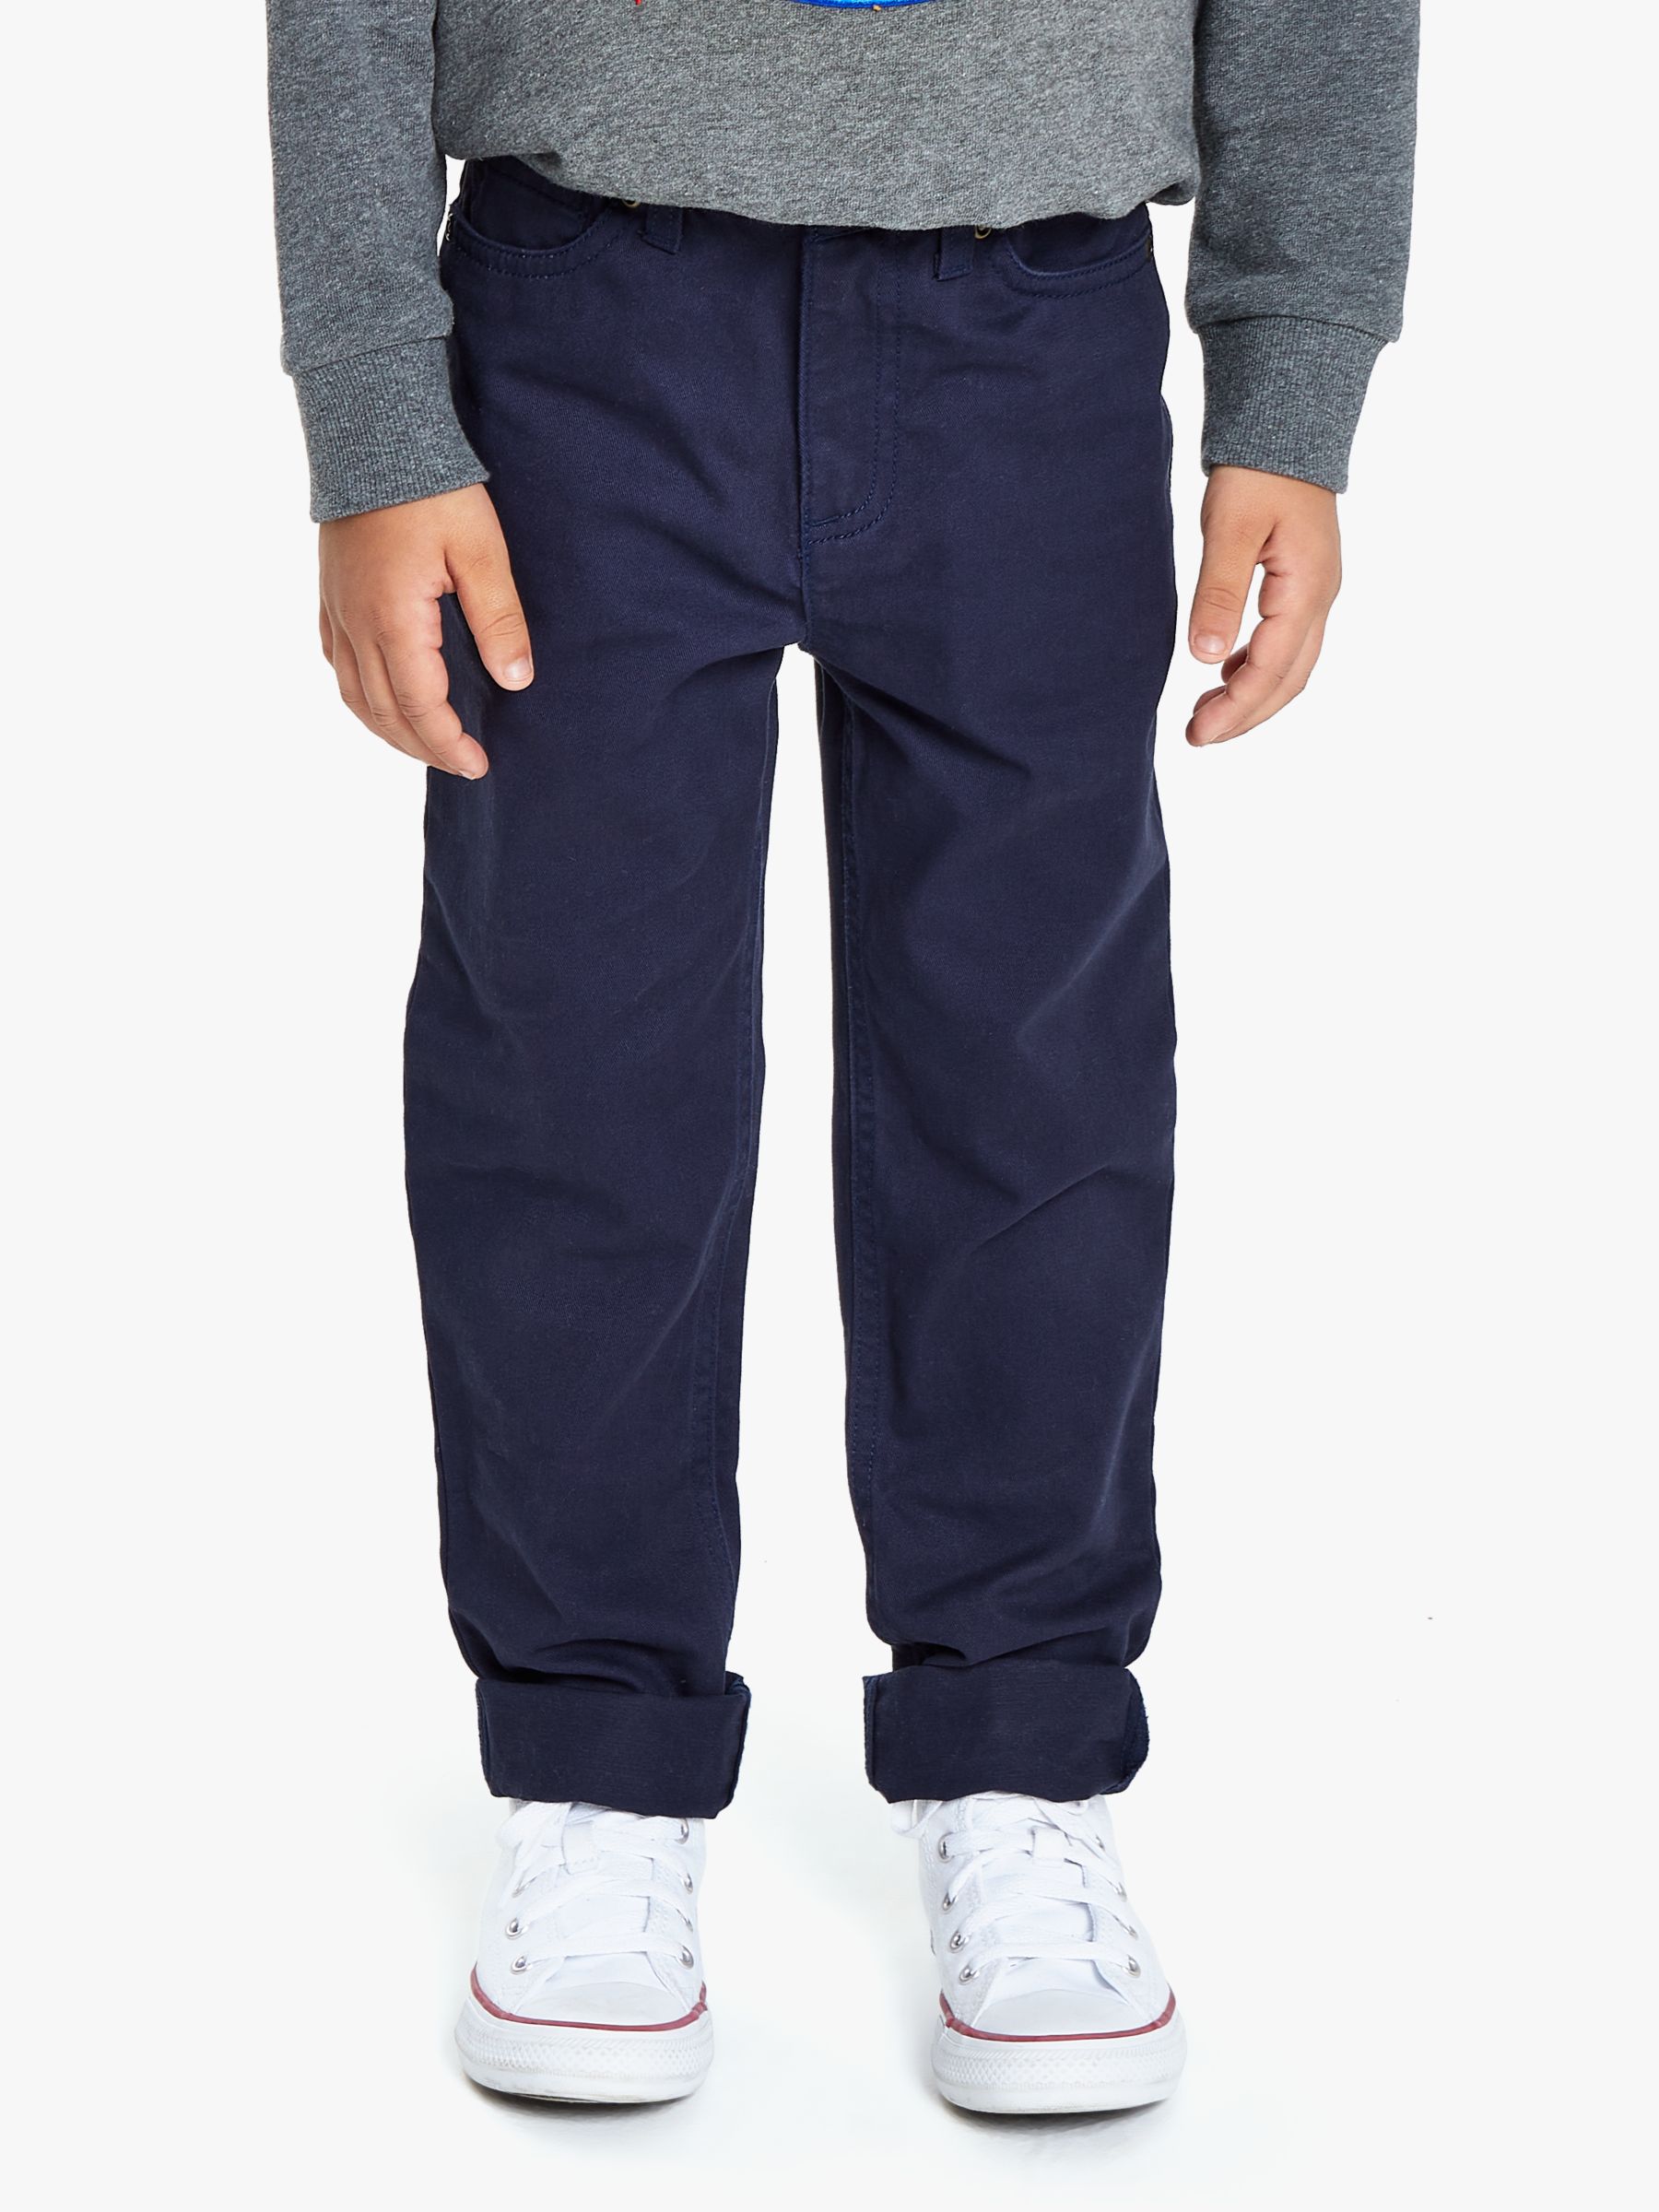 Image of John Lewis and Partners Boys 5 Pocket Chino Trousers